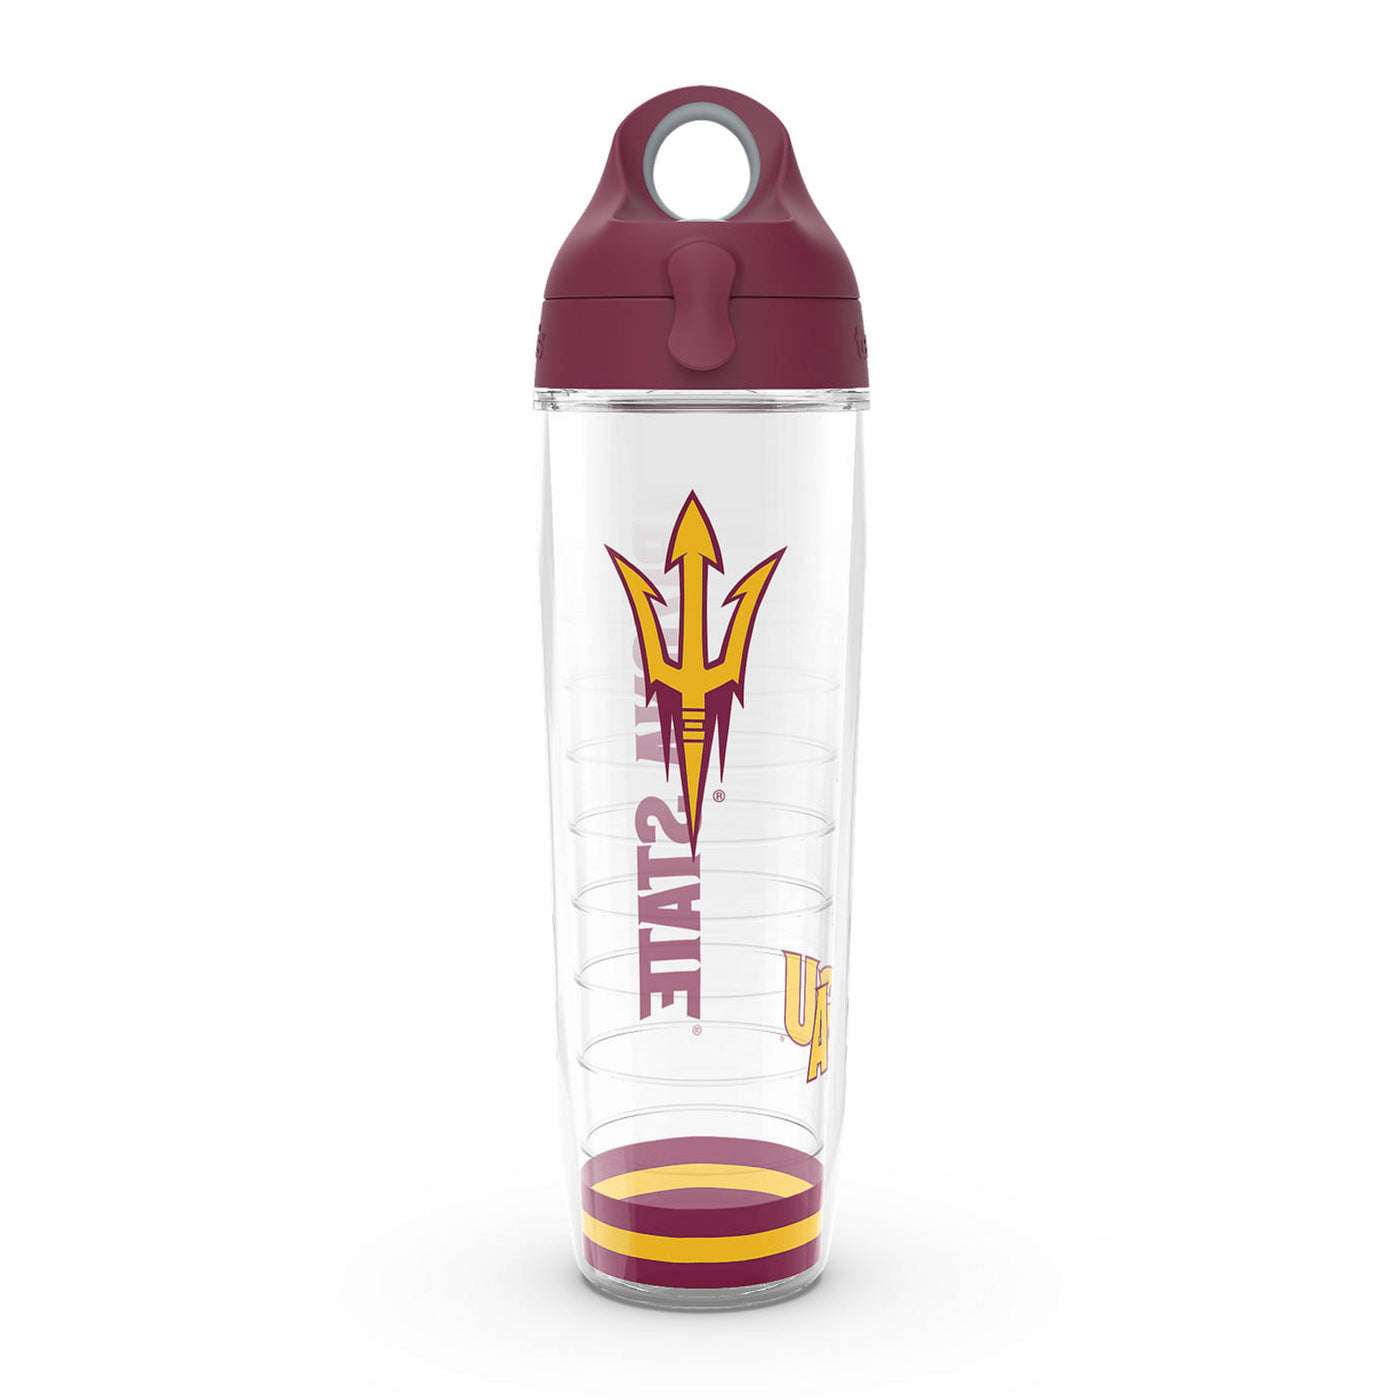 ASU water bottle with a maroon lid that has a finger hole at the top, a pitchfork on the front, and 'Arizona State' along the back in a vertical line